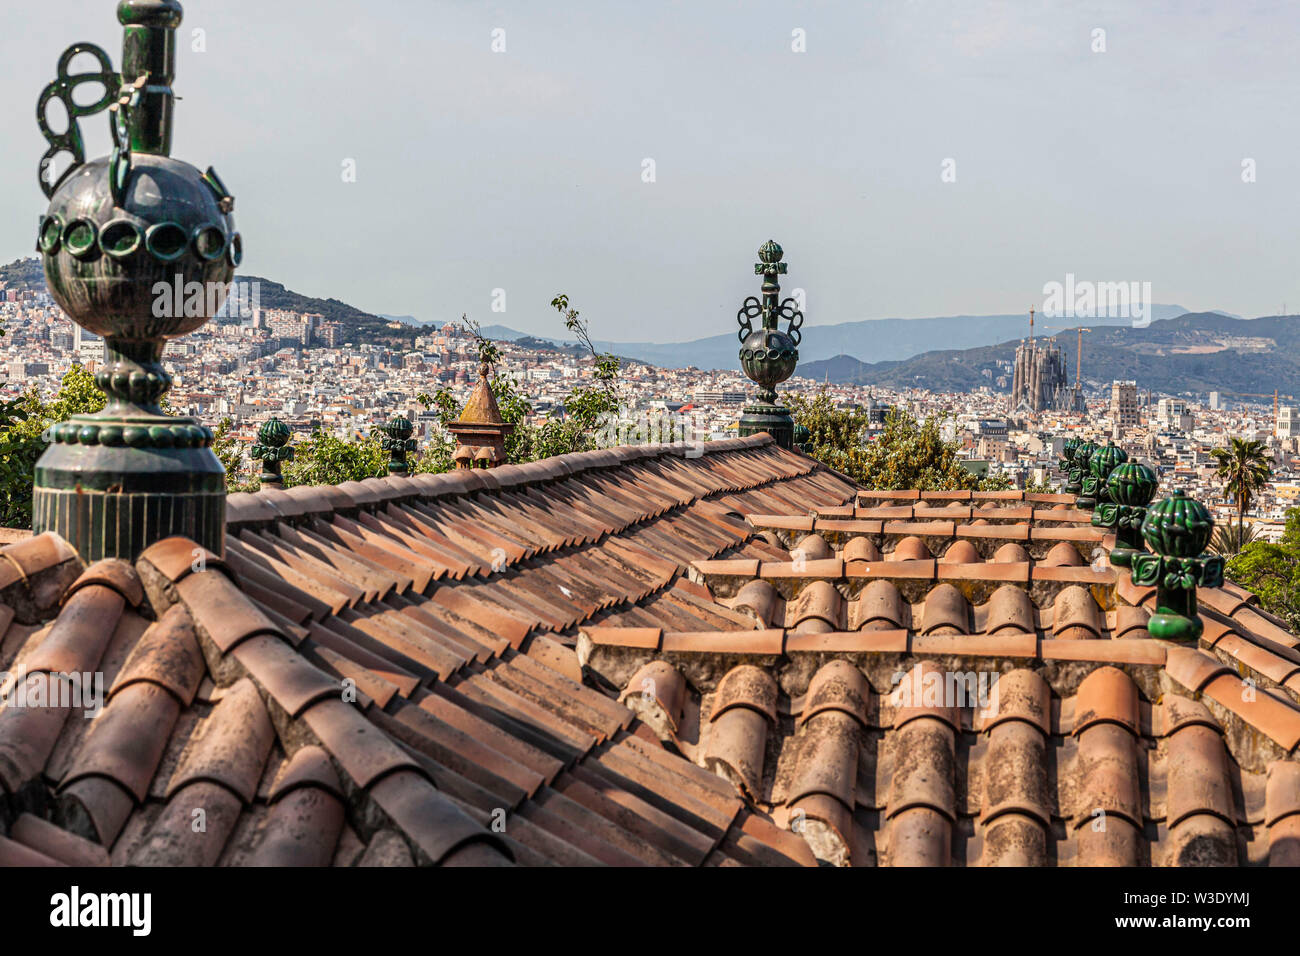 Artistic roof of restaurant building designed by Josep Puig i Cadafalch in Montjuic park of Barcelona, Catalonia, Spain. Stock Photo